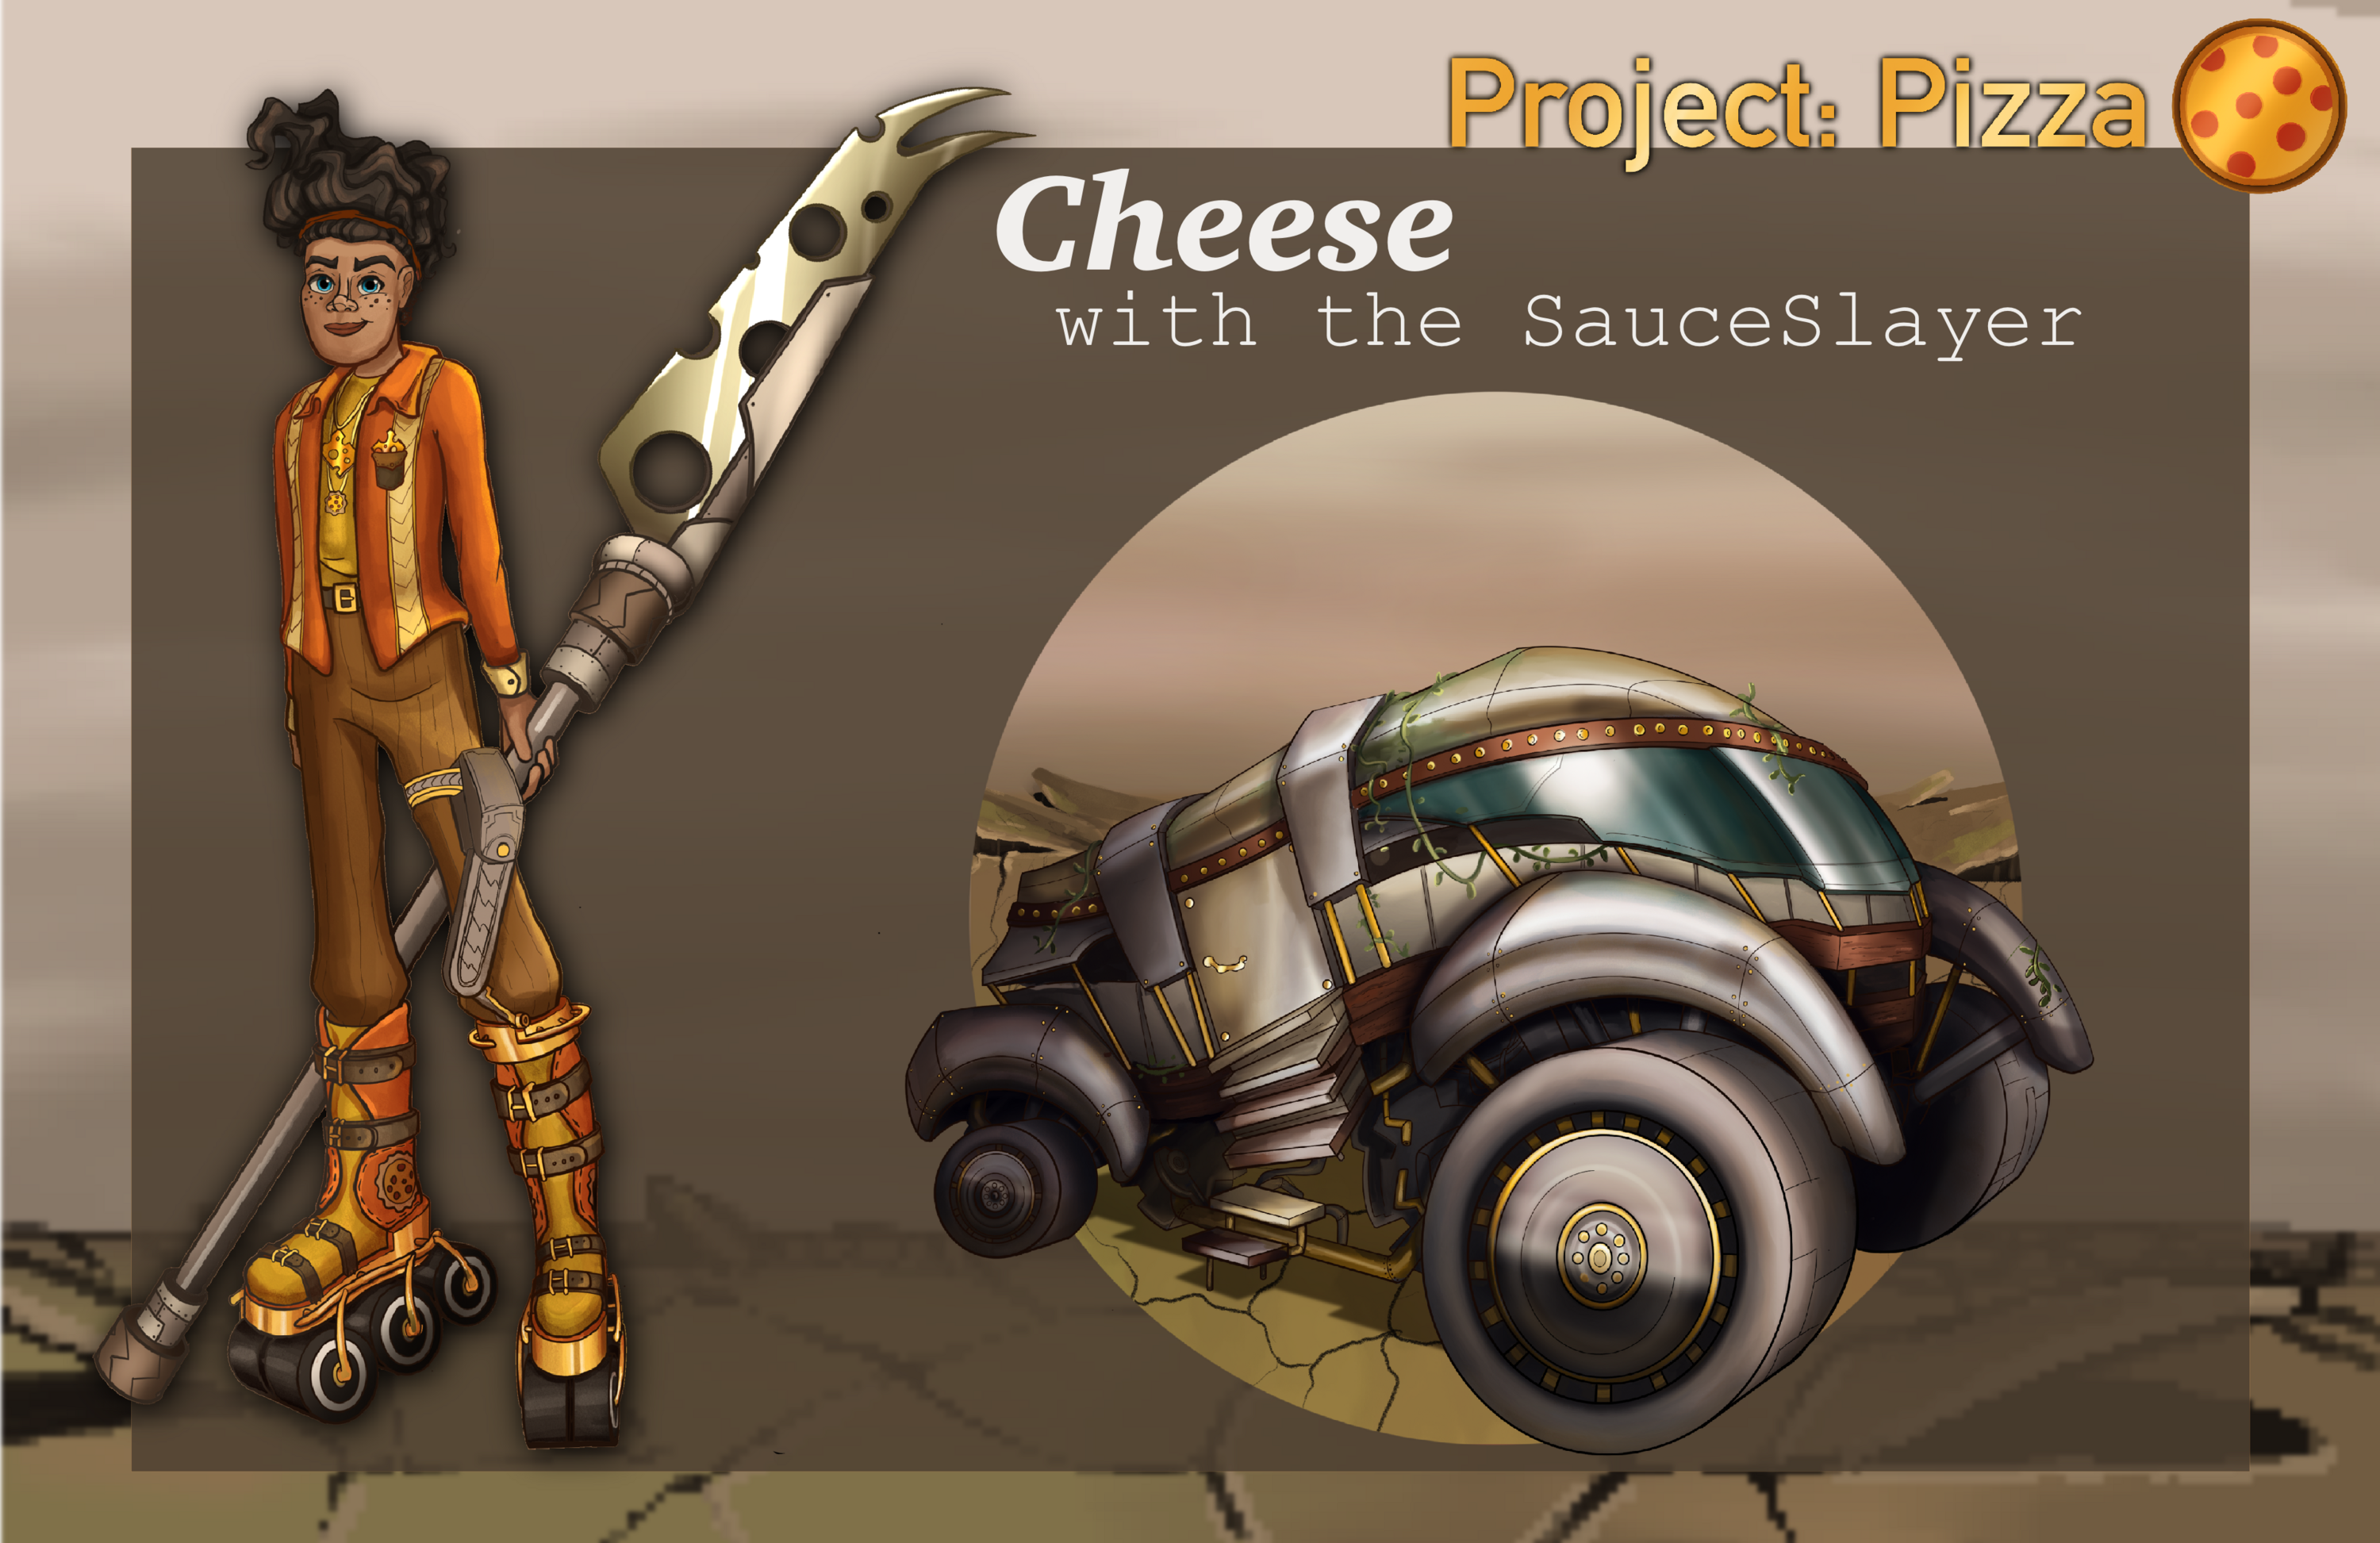 Cheese with the SauceSlayer